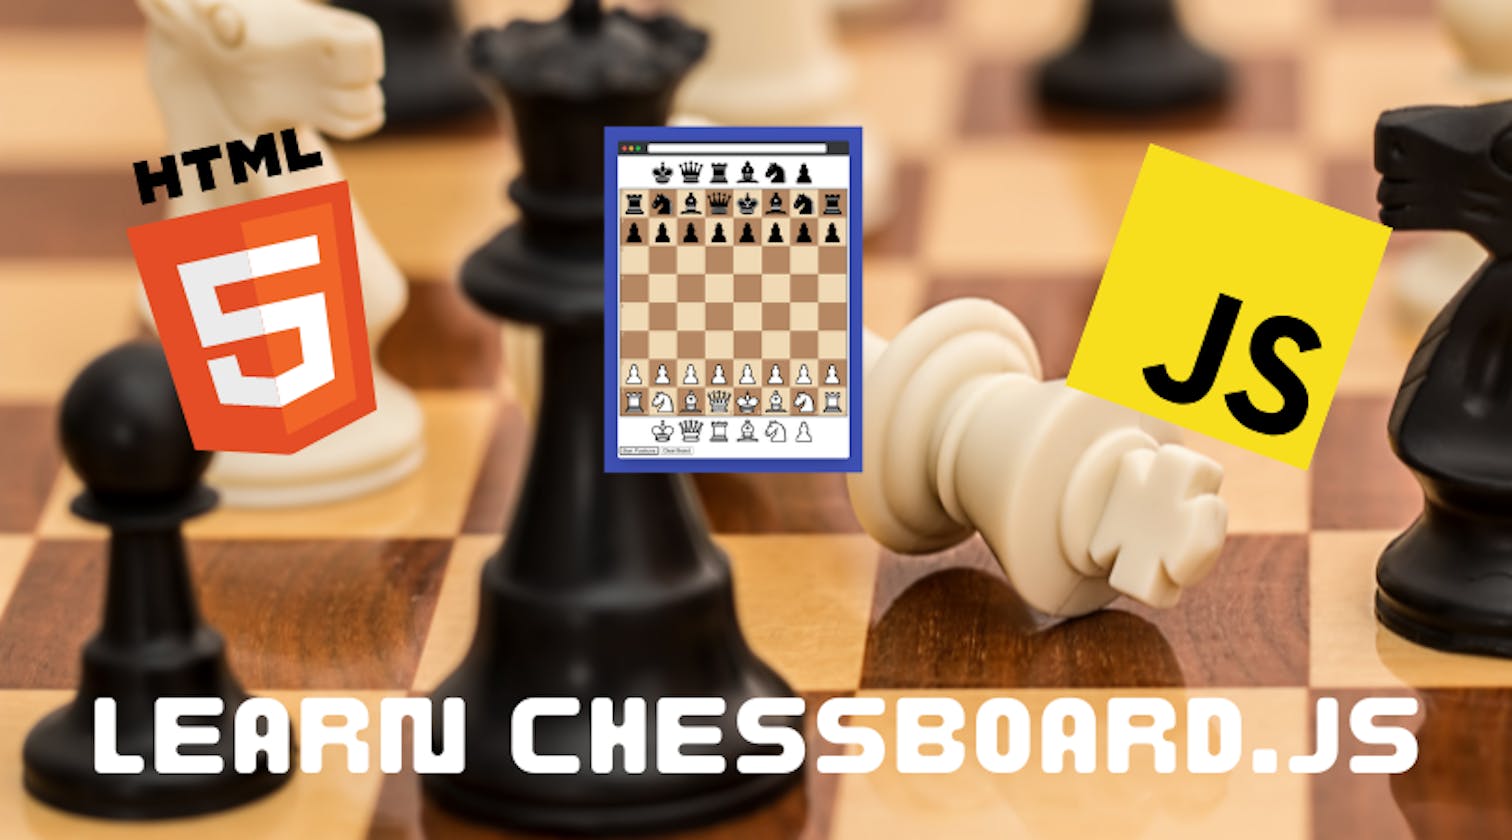 Make a basic chess board with chessboard.js